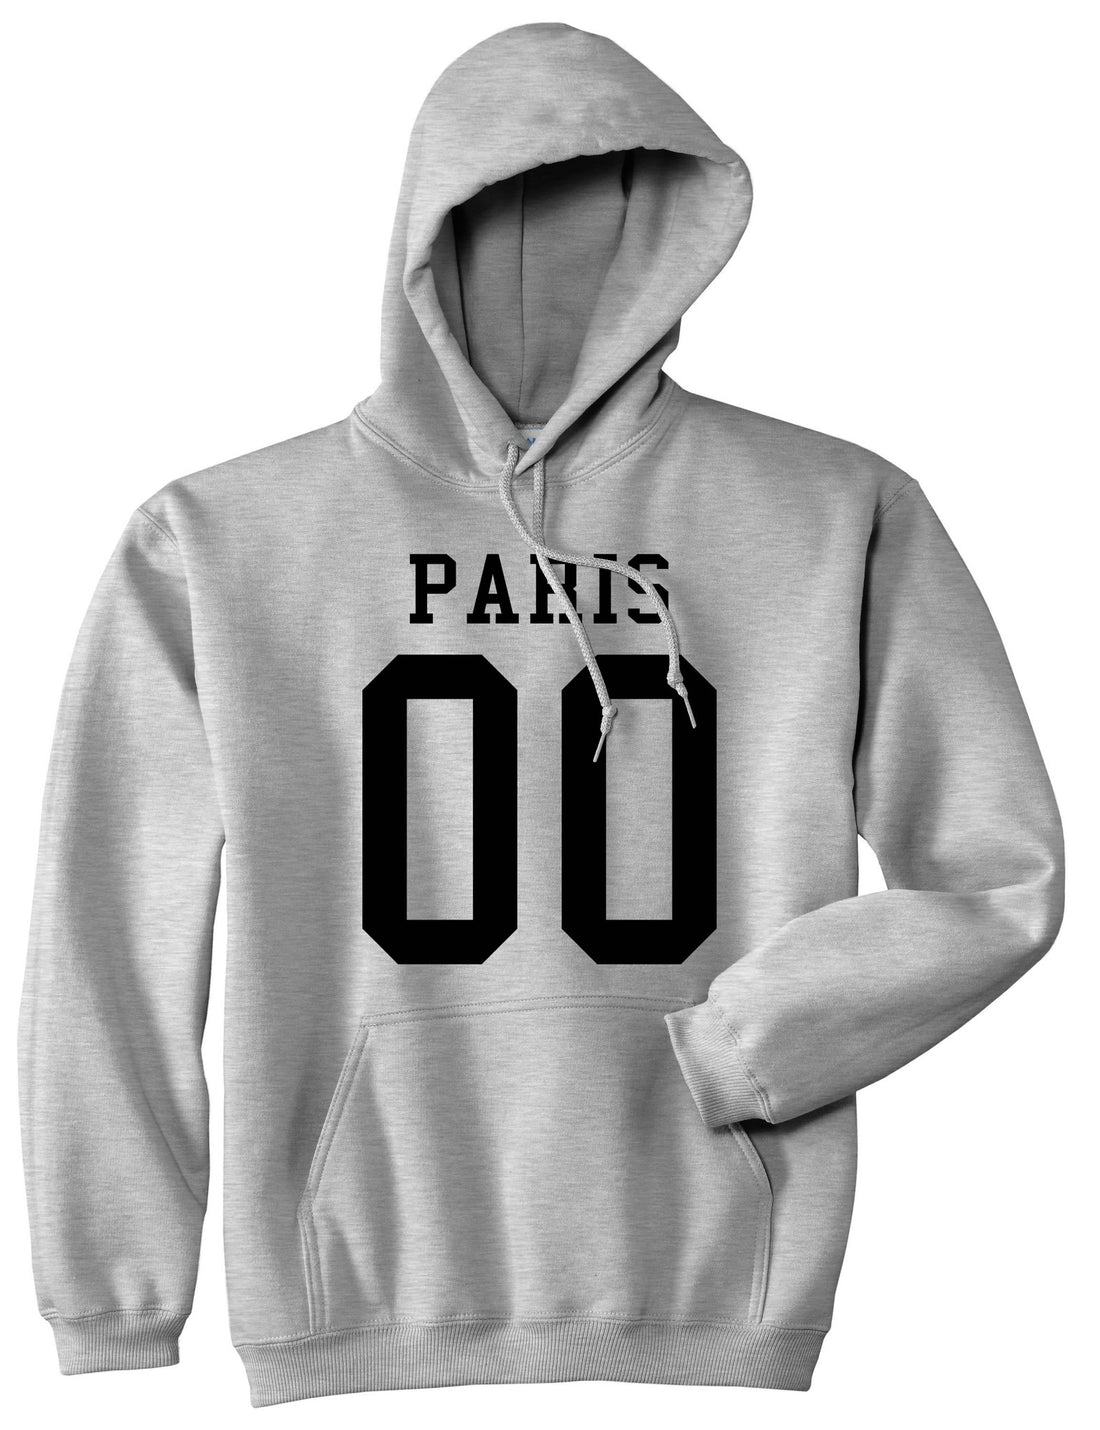 Paris Team 00 Jersey Pullover Hoodie in Grey By Kings Of NY